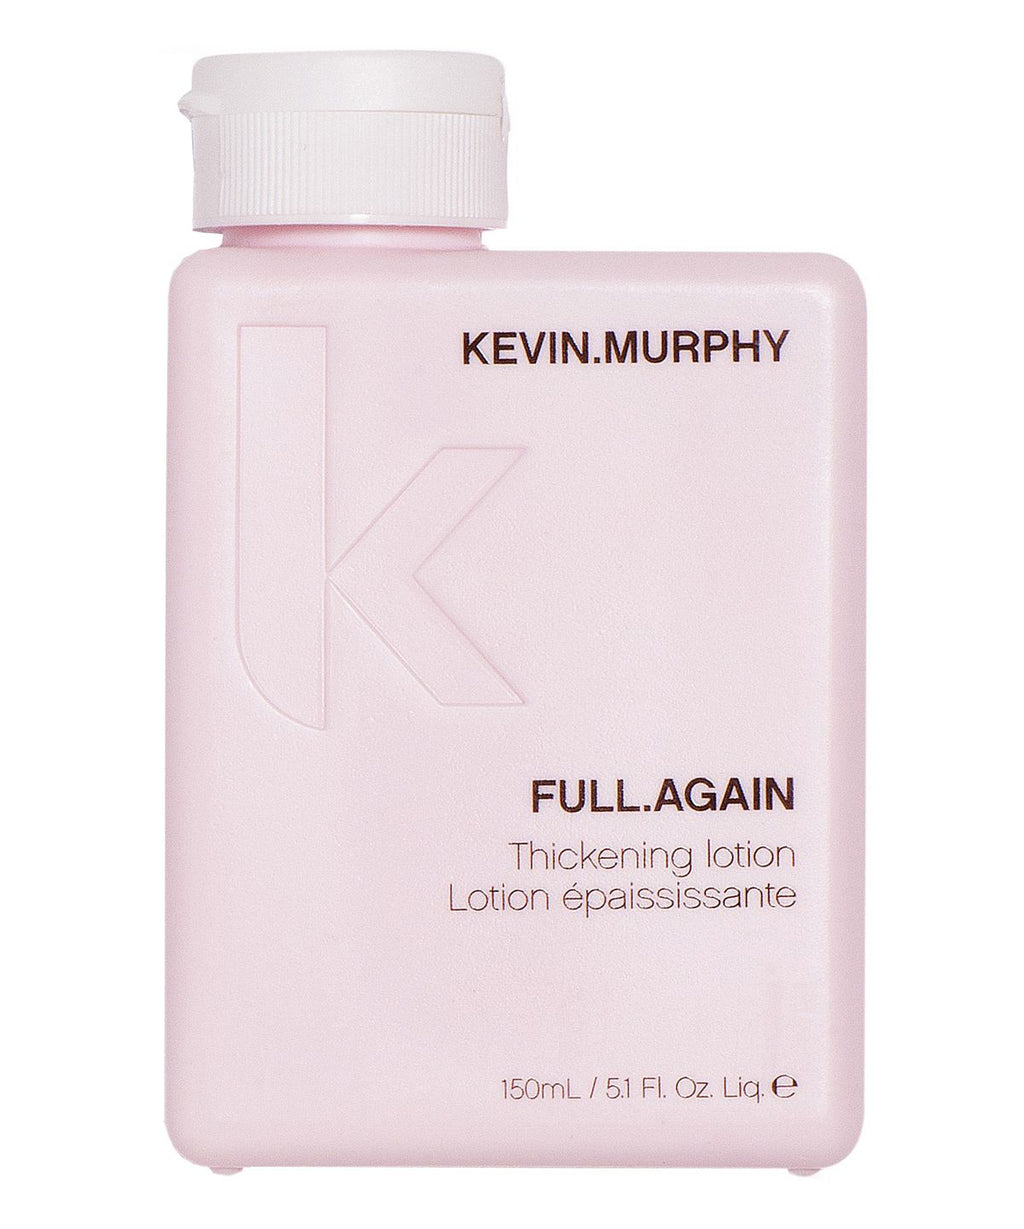 Kevin Murphy Full Again thickening lotion for fine, coloured and damaged hair 150g